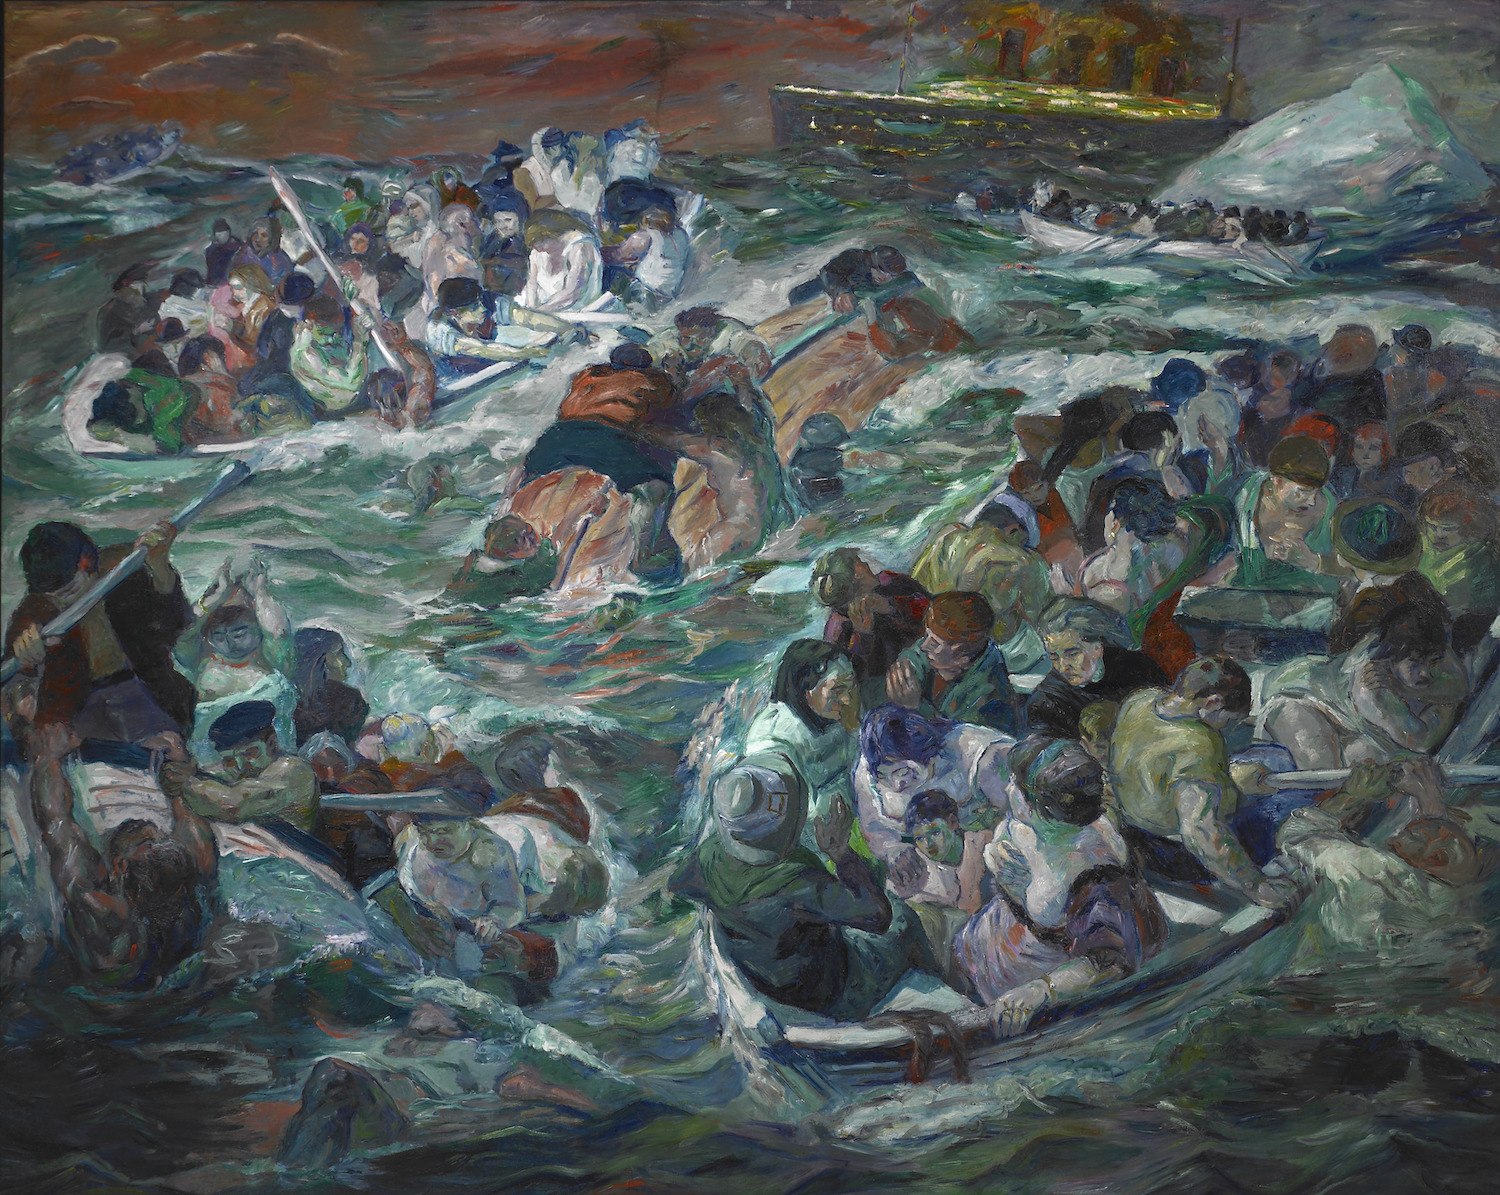 Max Beckmann, German, 1884–1950; Sinking of the Titanic, 1912–1913; oil on canvas; Saint Louis Art Museum, Bequest of Morton D. May 840:1983